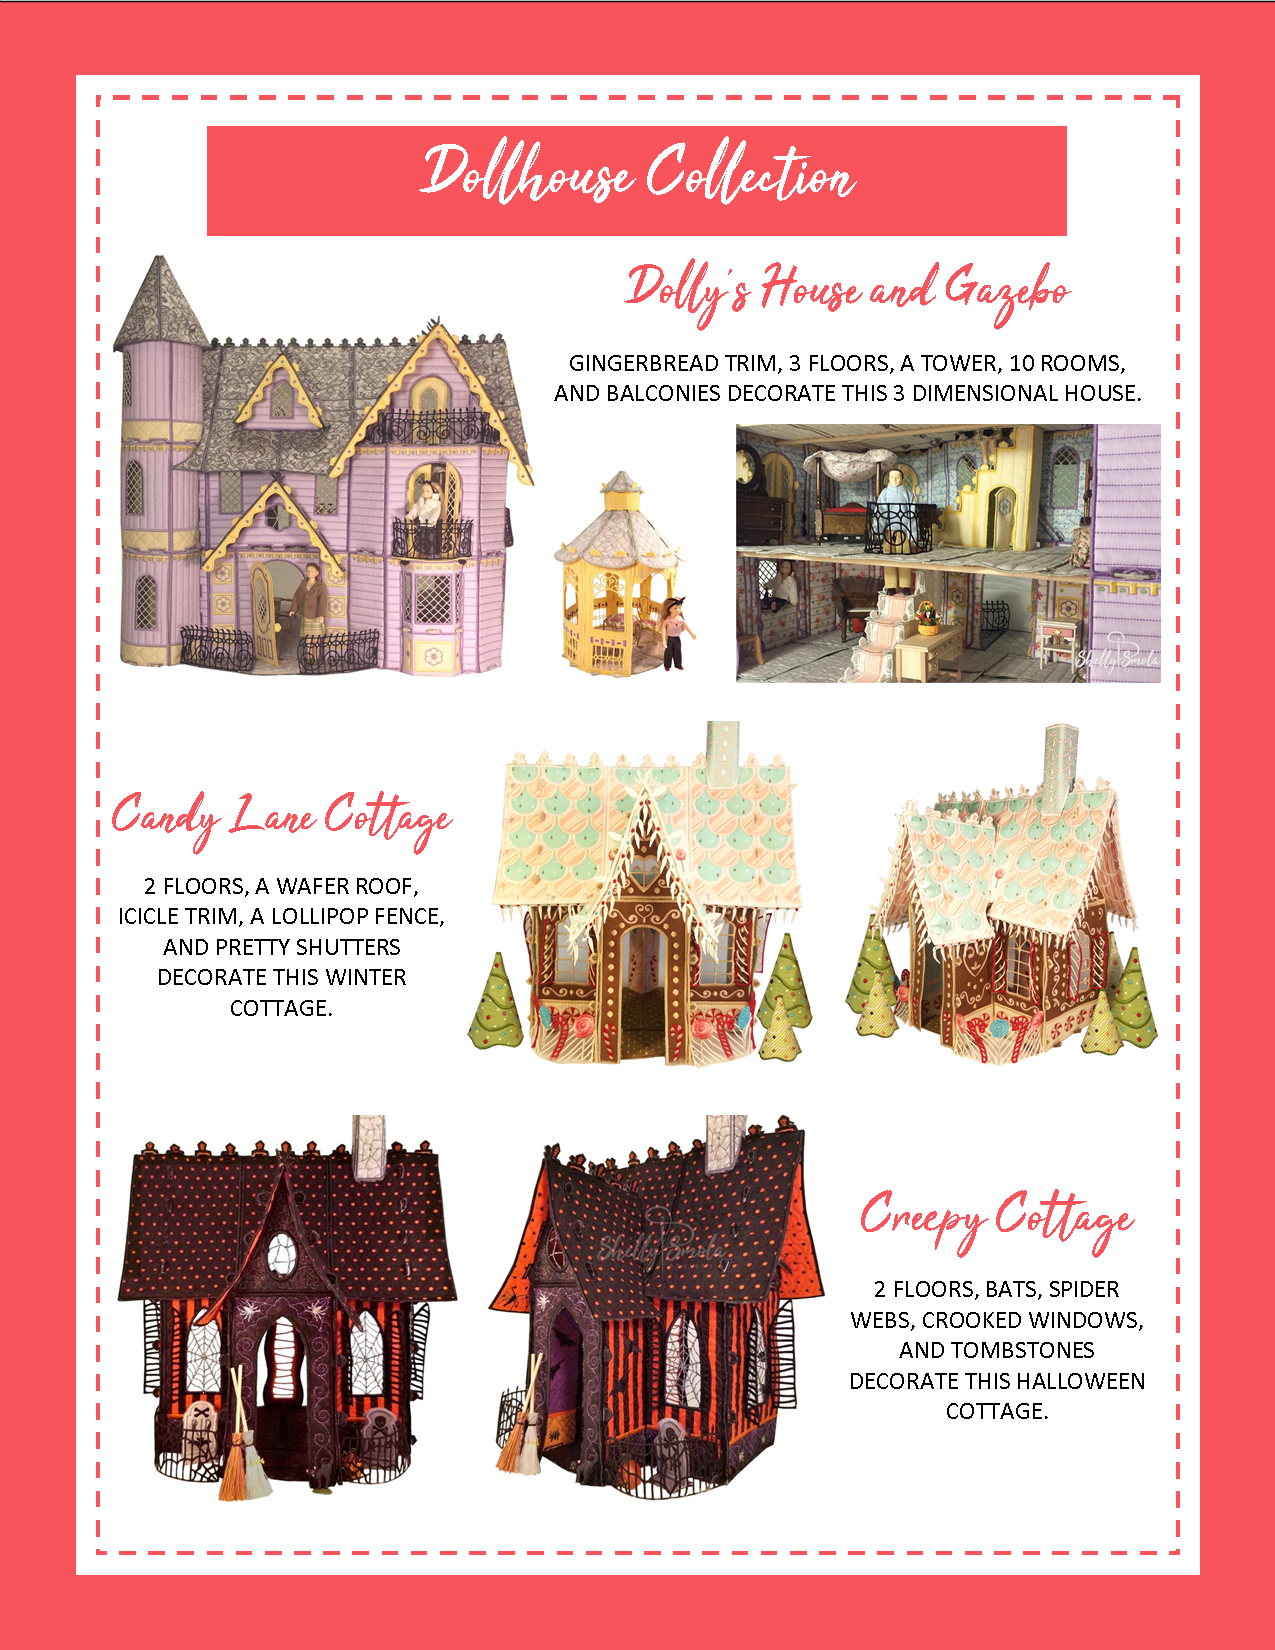 Dollhouse Collection by Shelly Smola